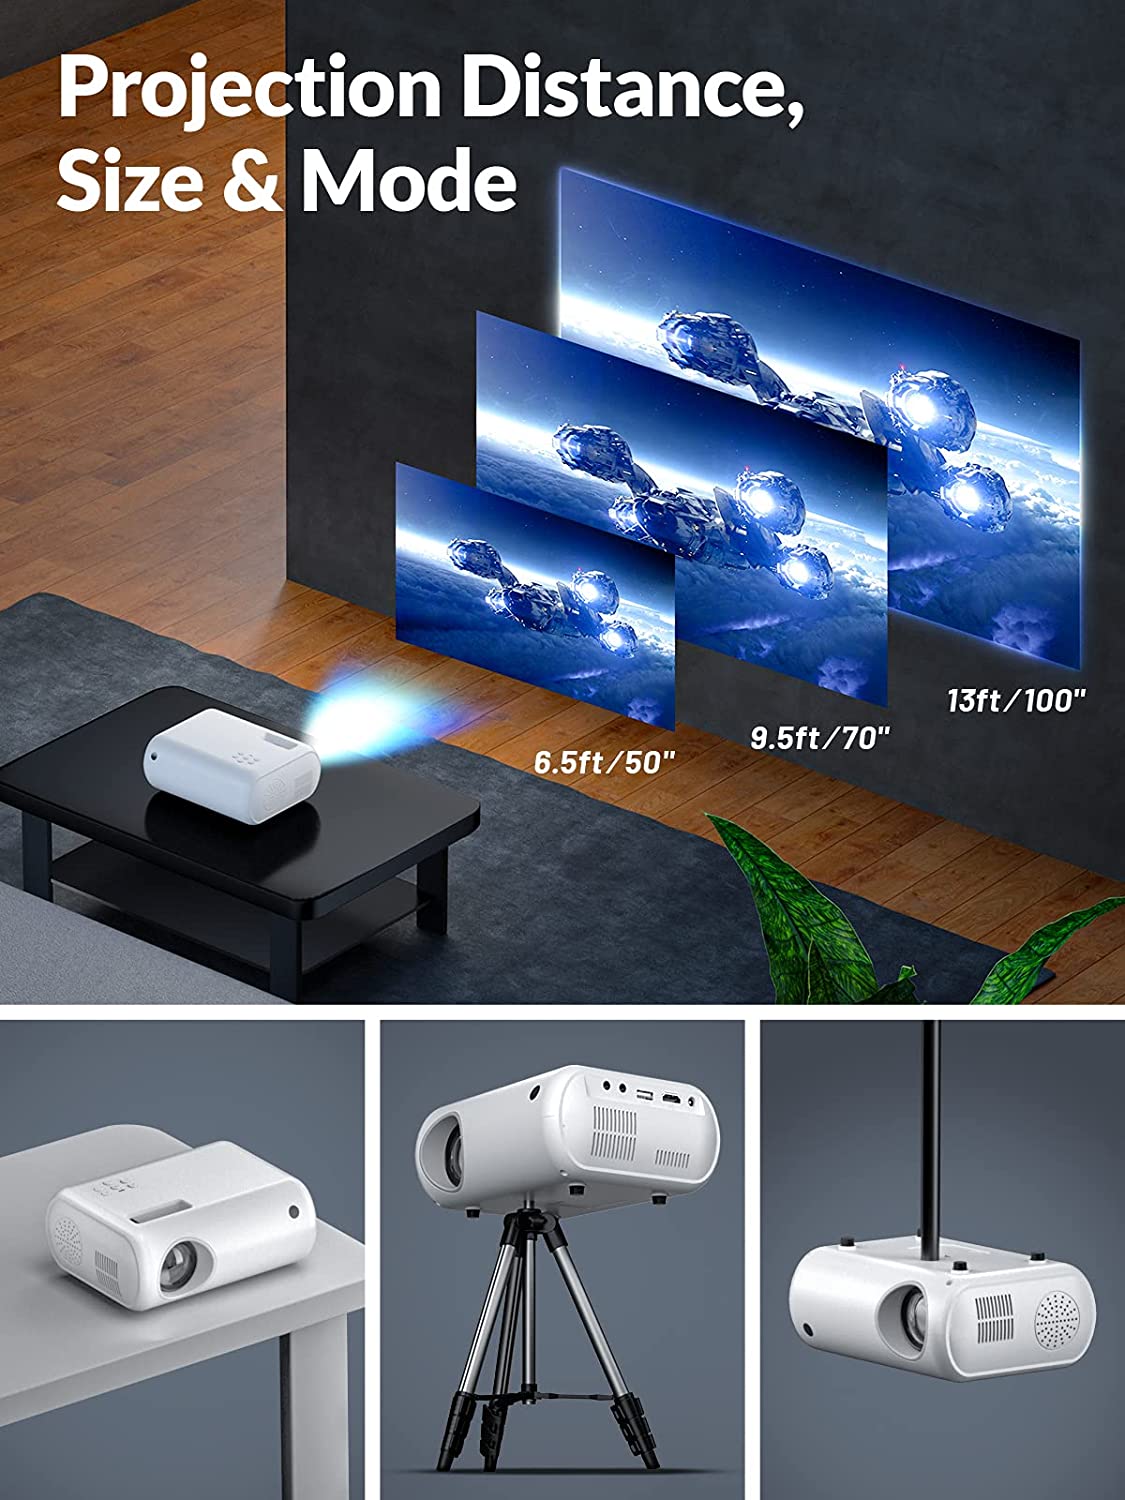 Native 1080P WiFi Projector, AKIYO 300'' Max iOS & Android Wireless  Connection Phone Projector, Portable Video Home Outdoor Movie Projector,  Support HDMI, TV Stick, USB, PS5, Carrying Case Included